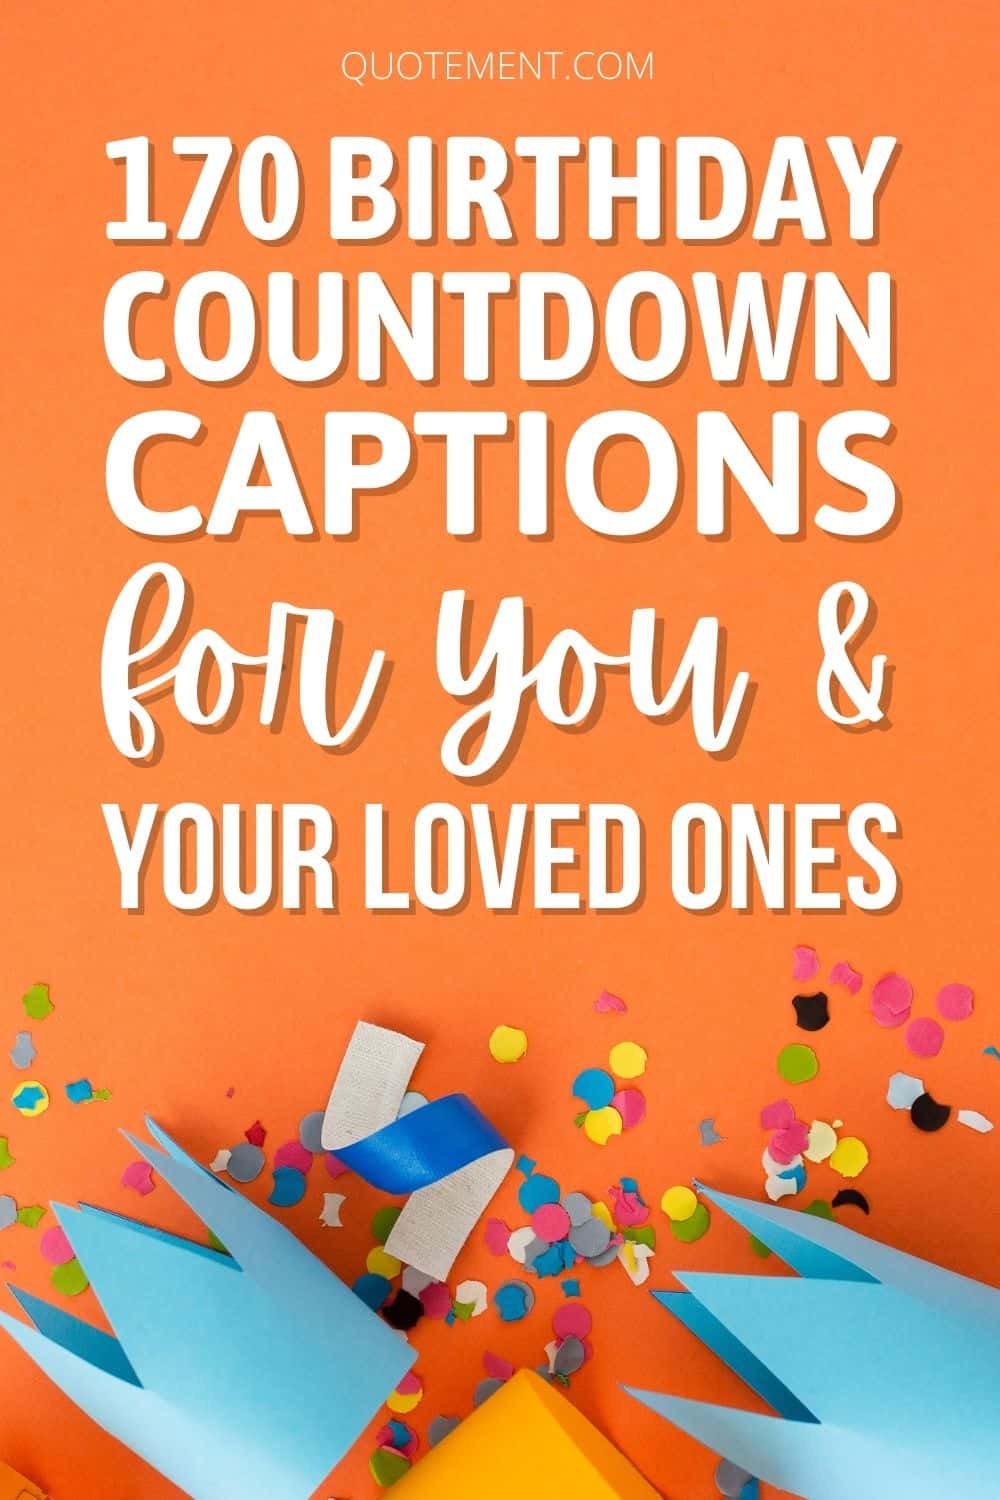 170 Birthday Countdown Captions For You & Your Loved Ones